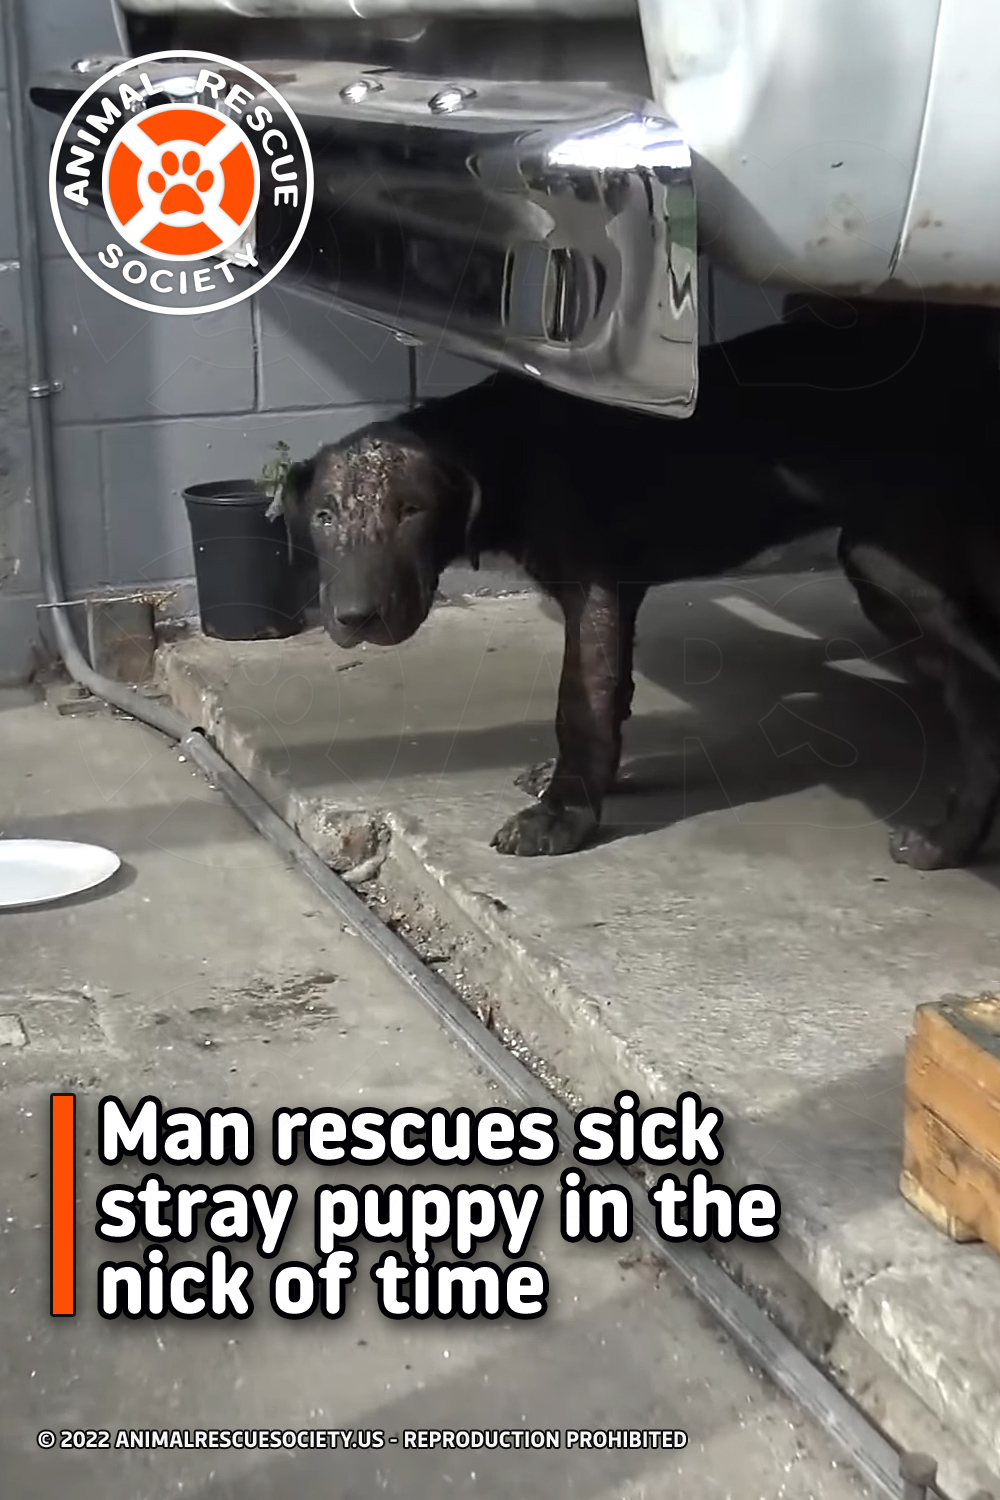 Man rescues sick stray puppy in the nick of time